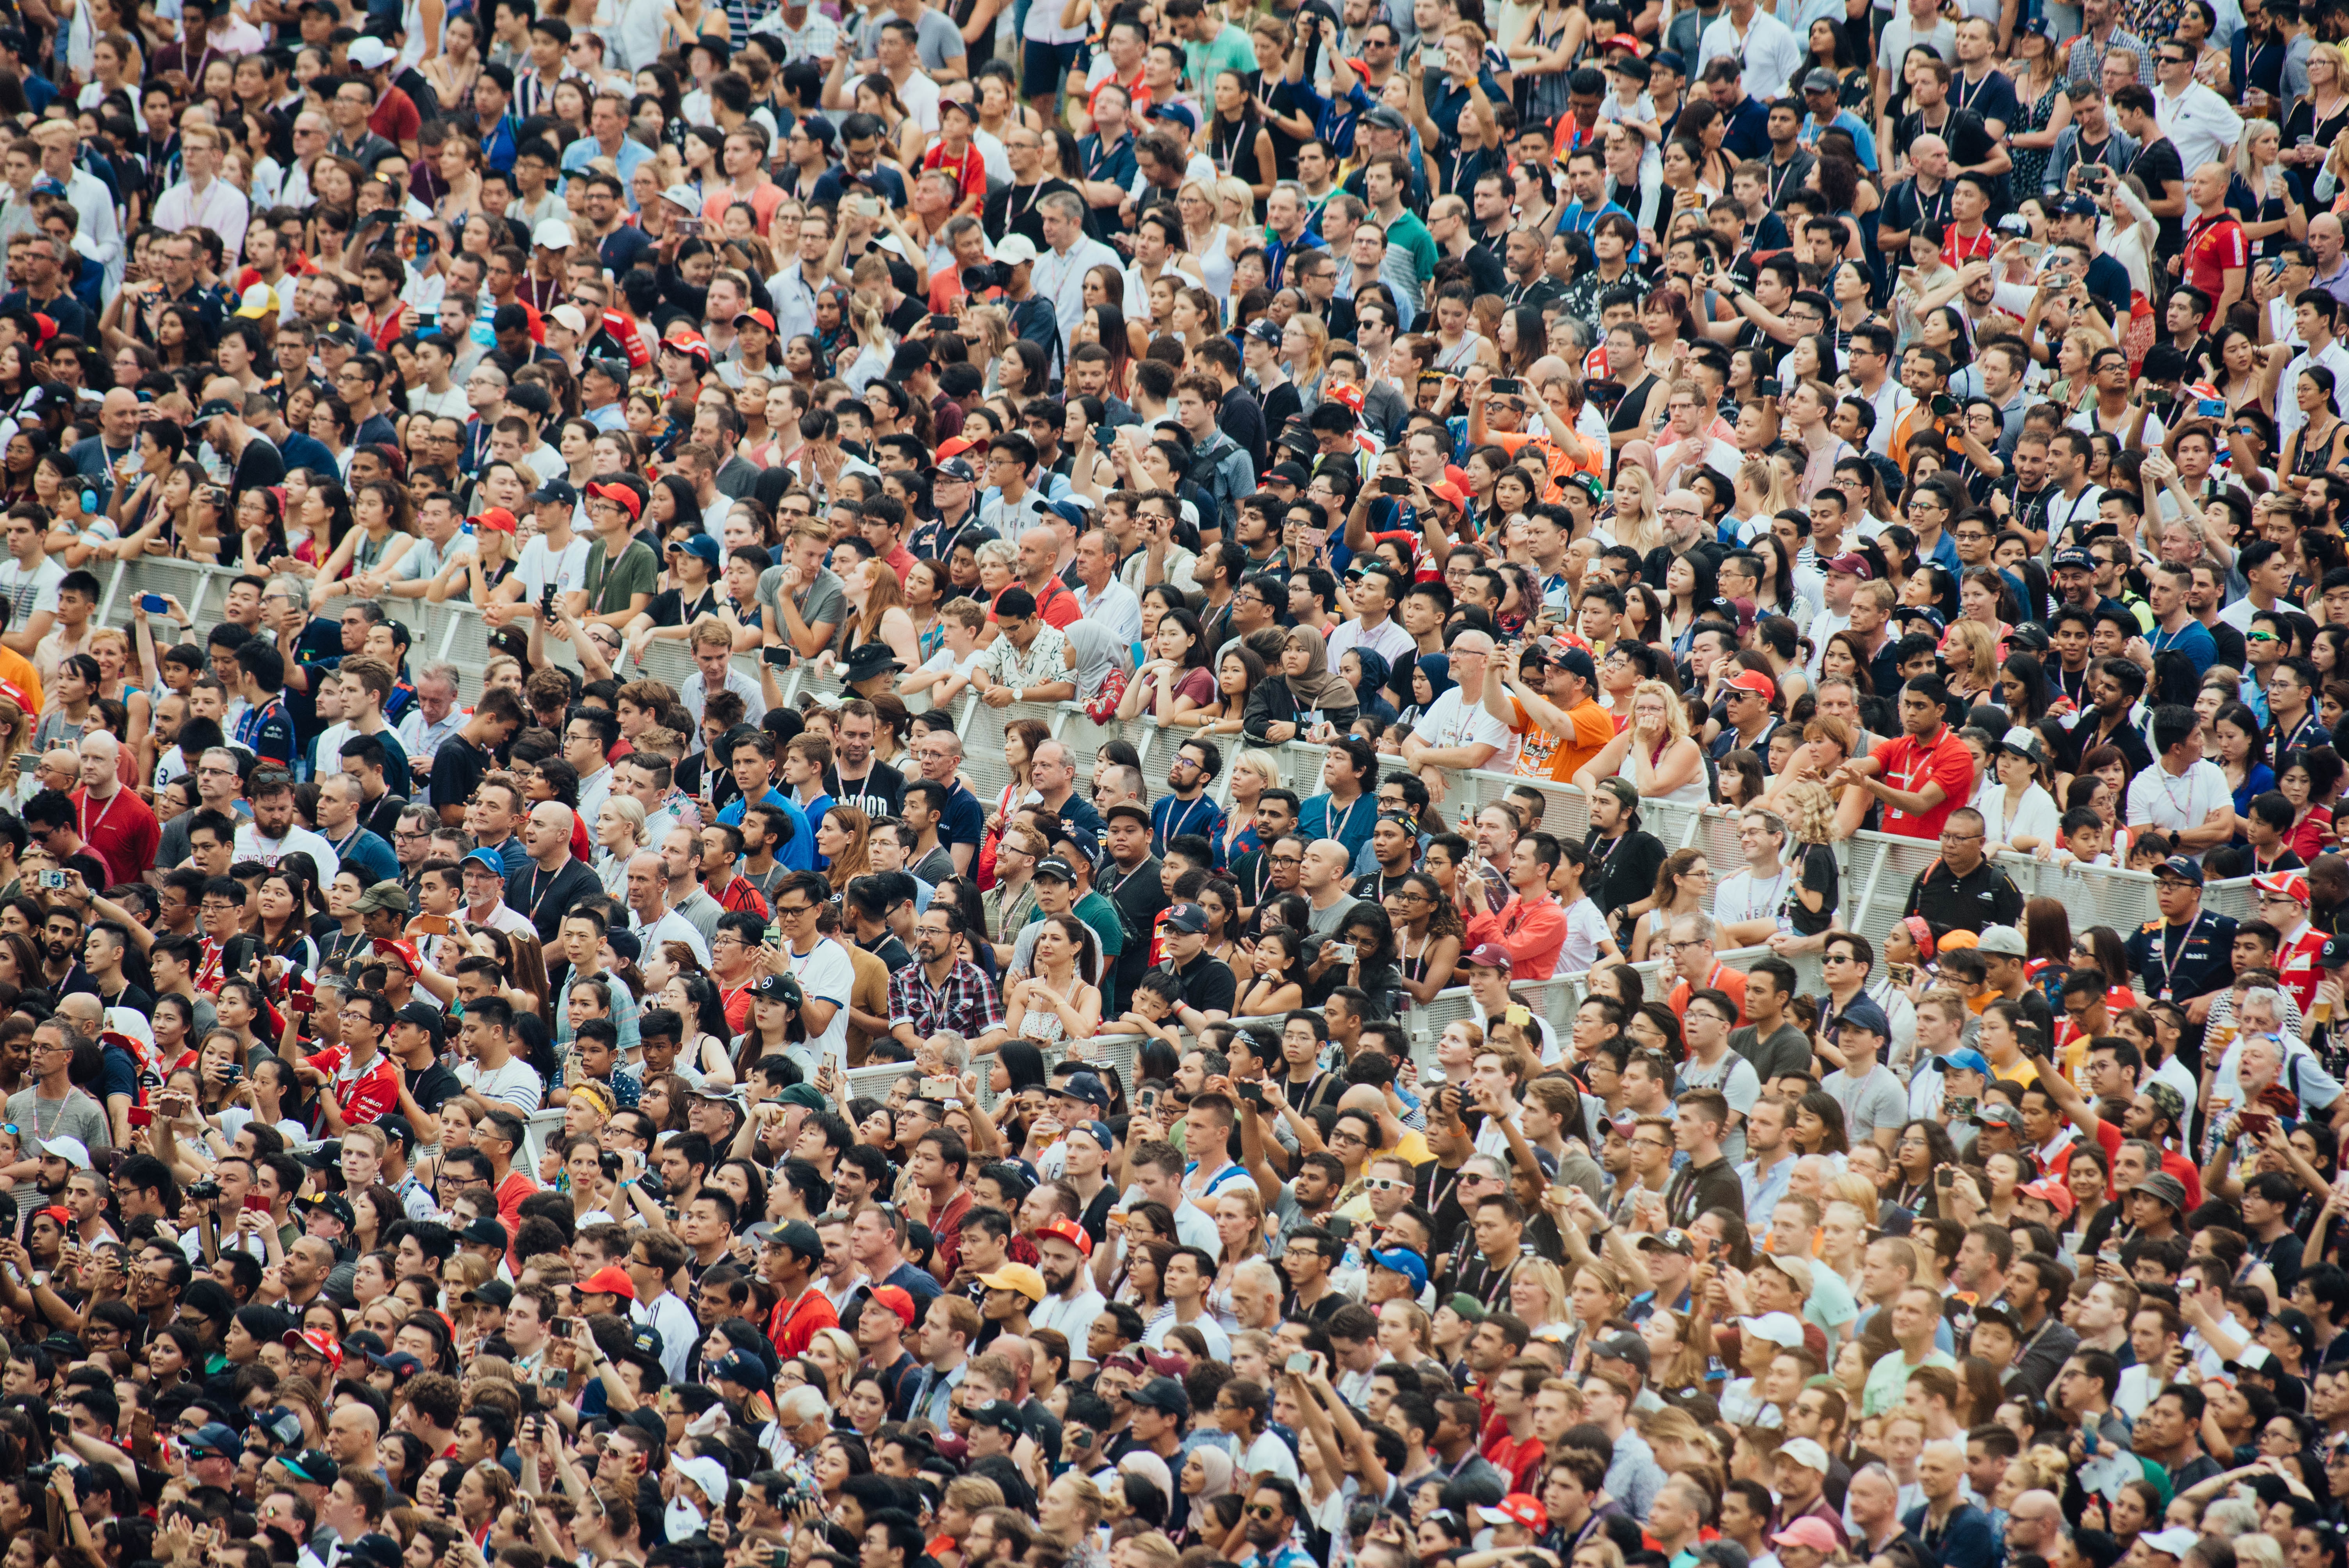 AAARHHHH! goes the crowd!…   photo by CHUTTERSNAP on Unsplash